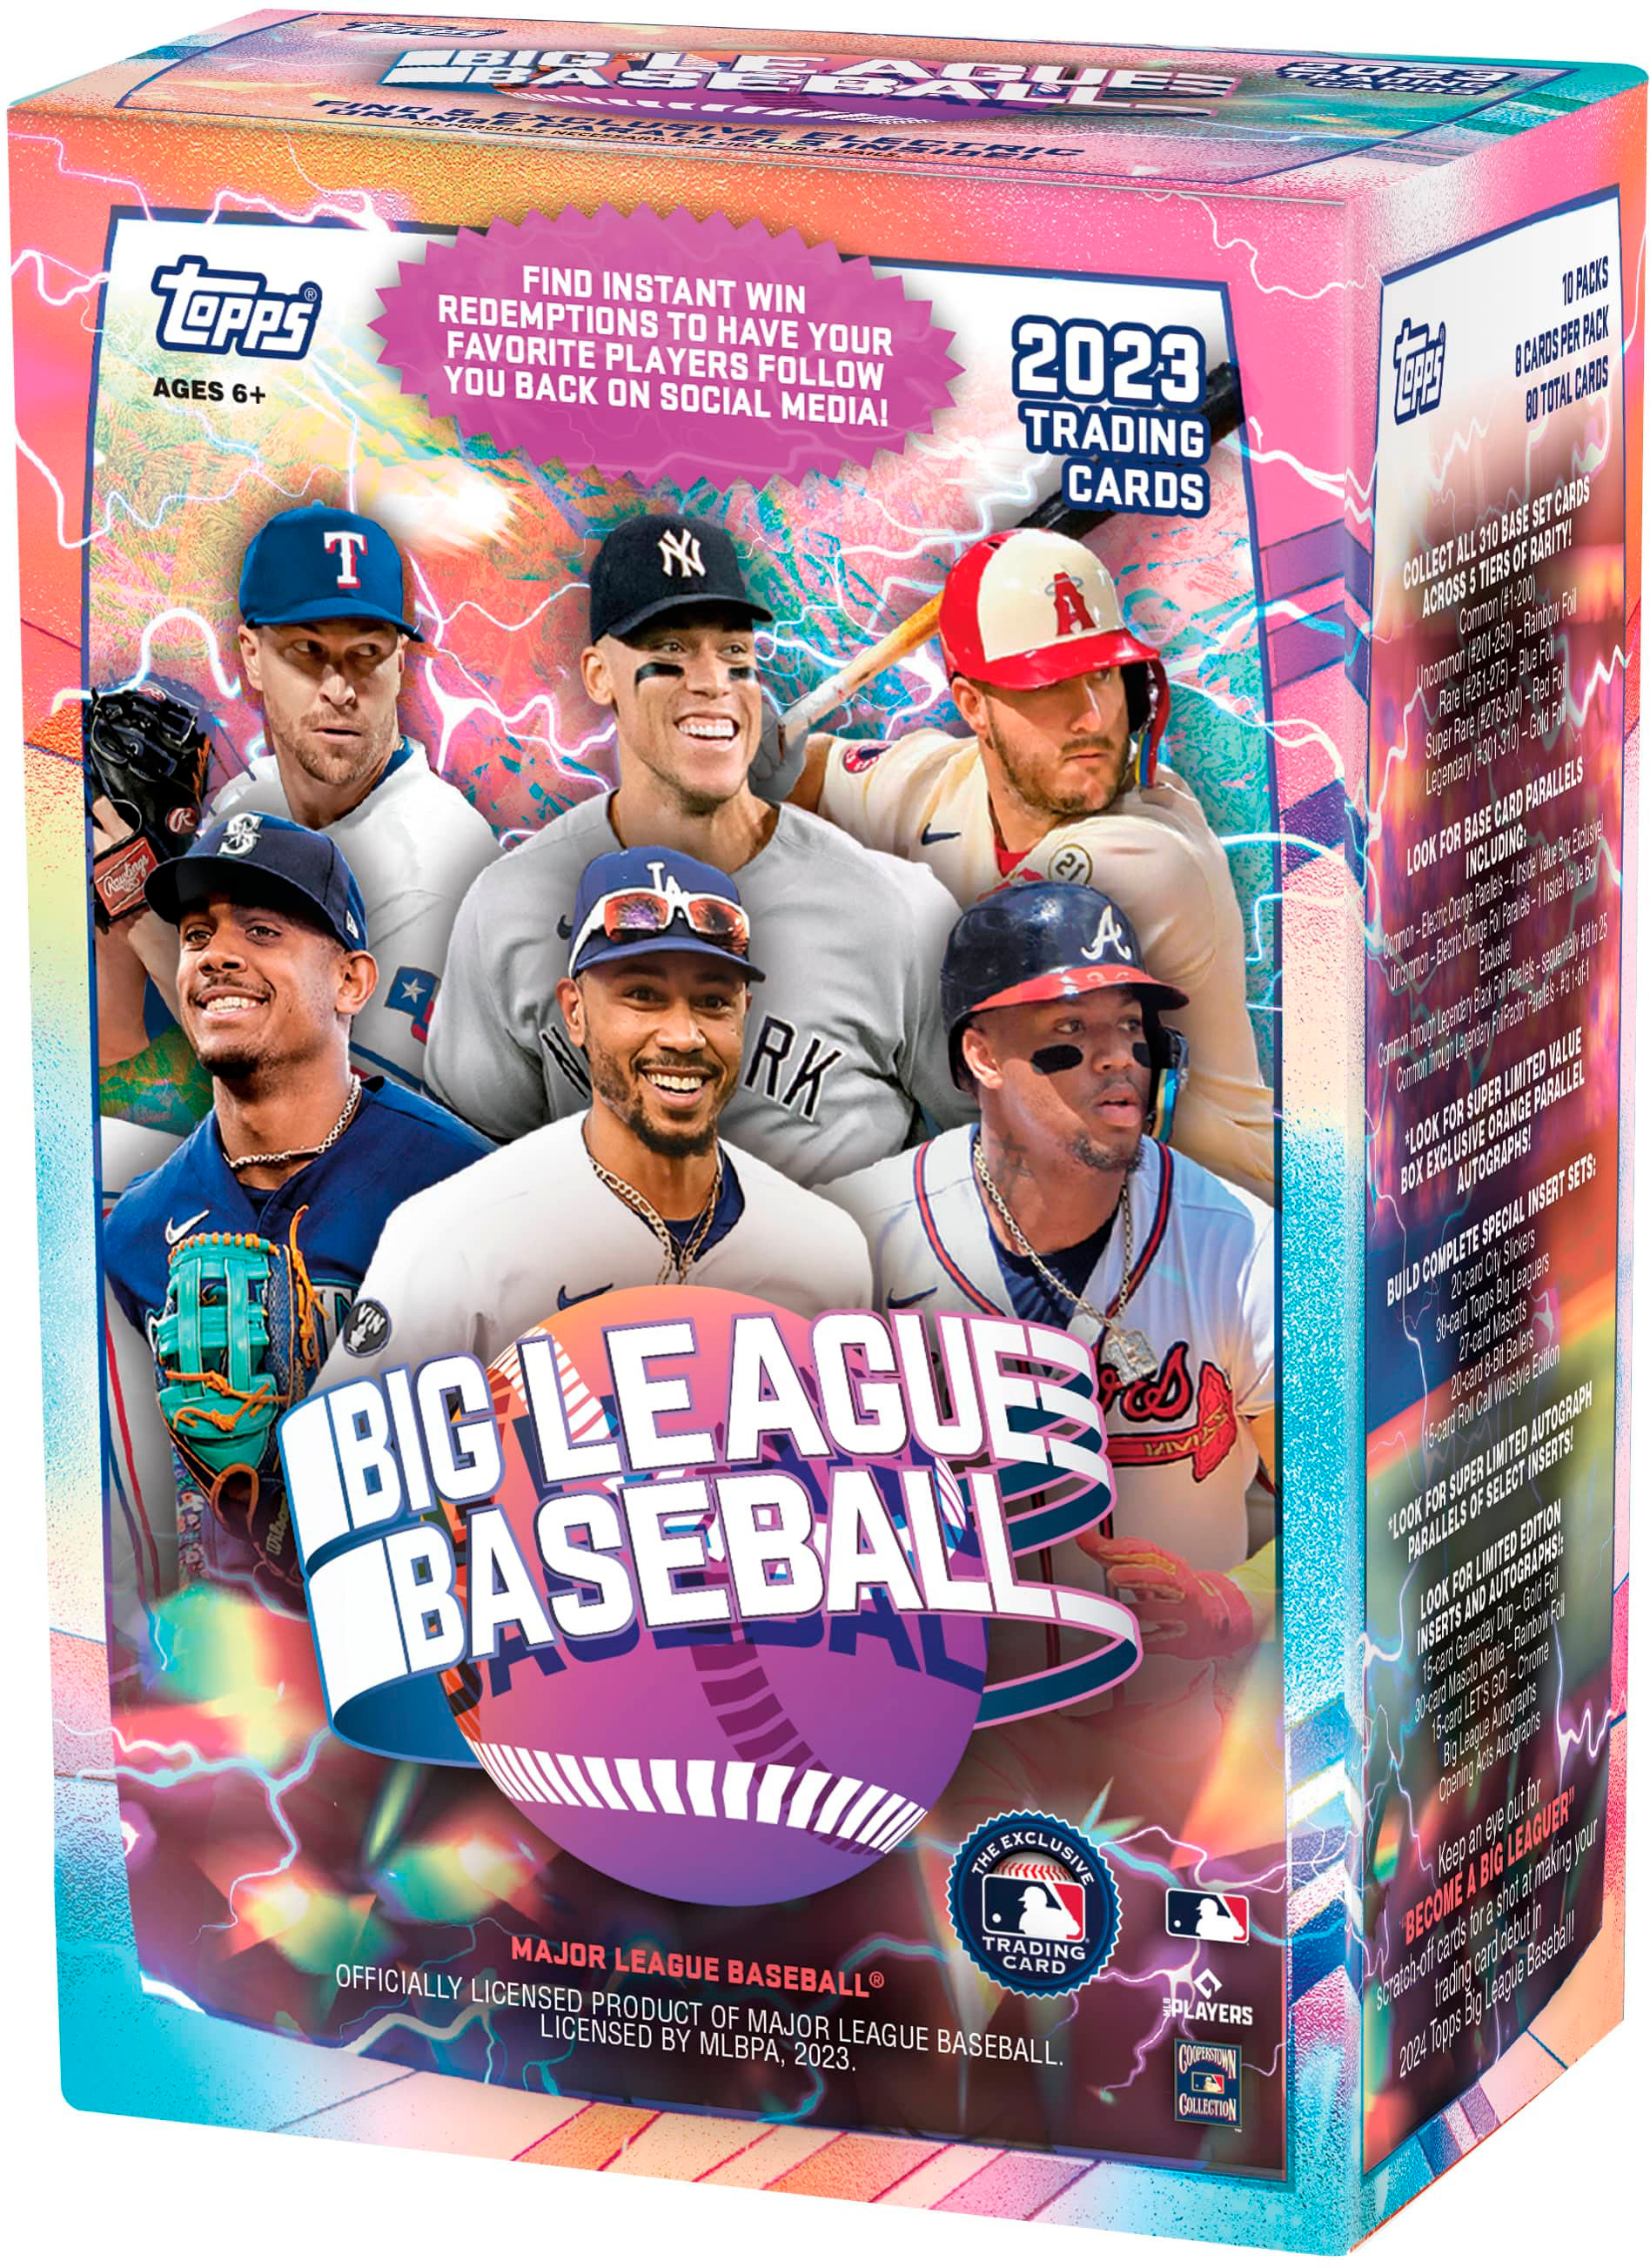 2023 Topps series 1 & 2 & UPDATE Stars of the MLB COMPLETE 90 CARD Set